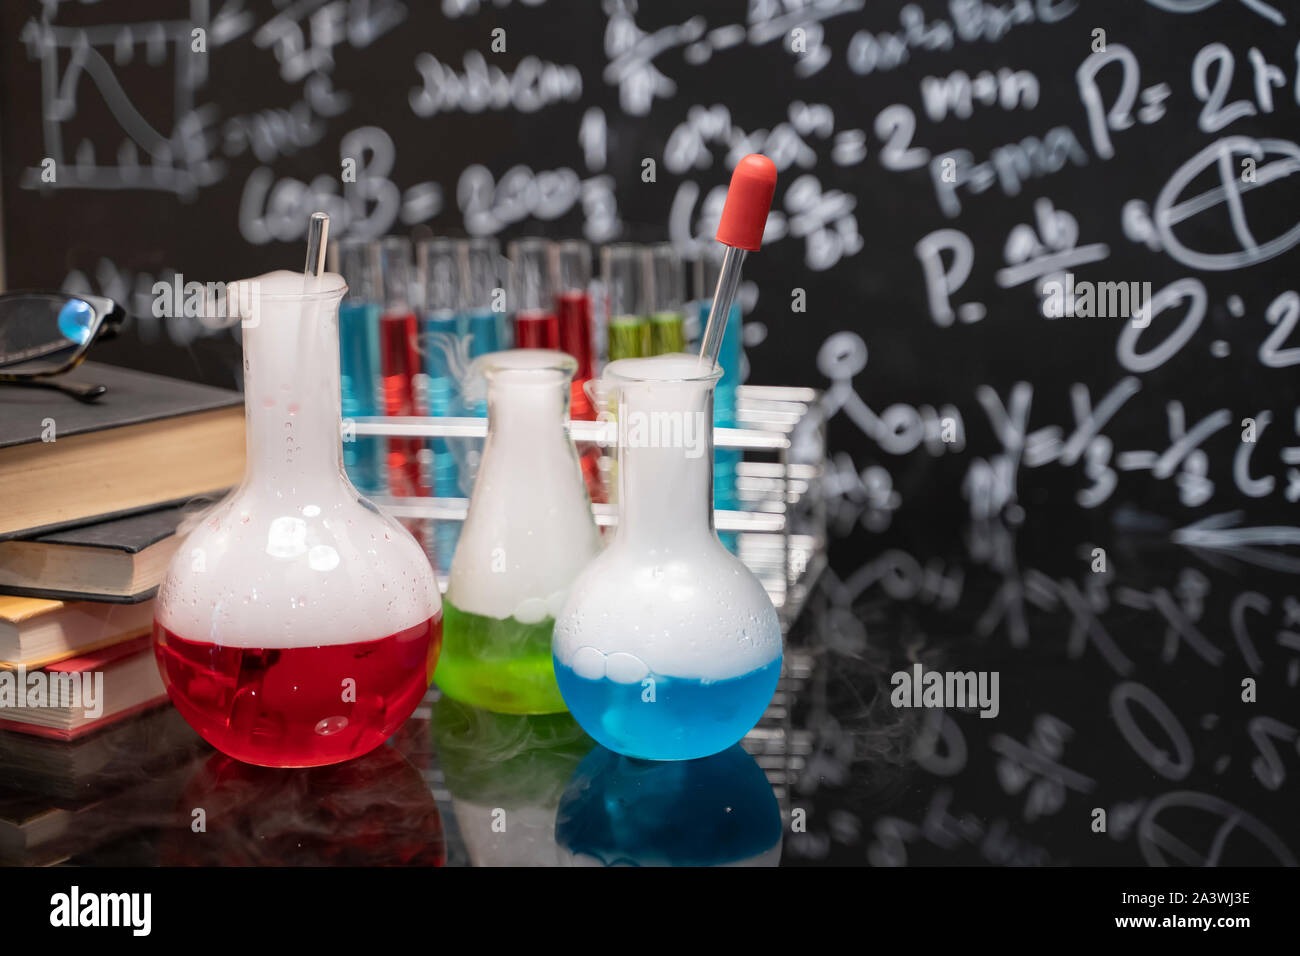 Classroom desk and drawn blackboard of chemistry teaching with books and instruments. Chemical sciences education concept. Stock Photo